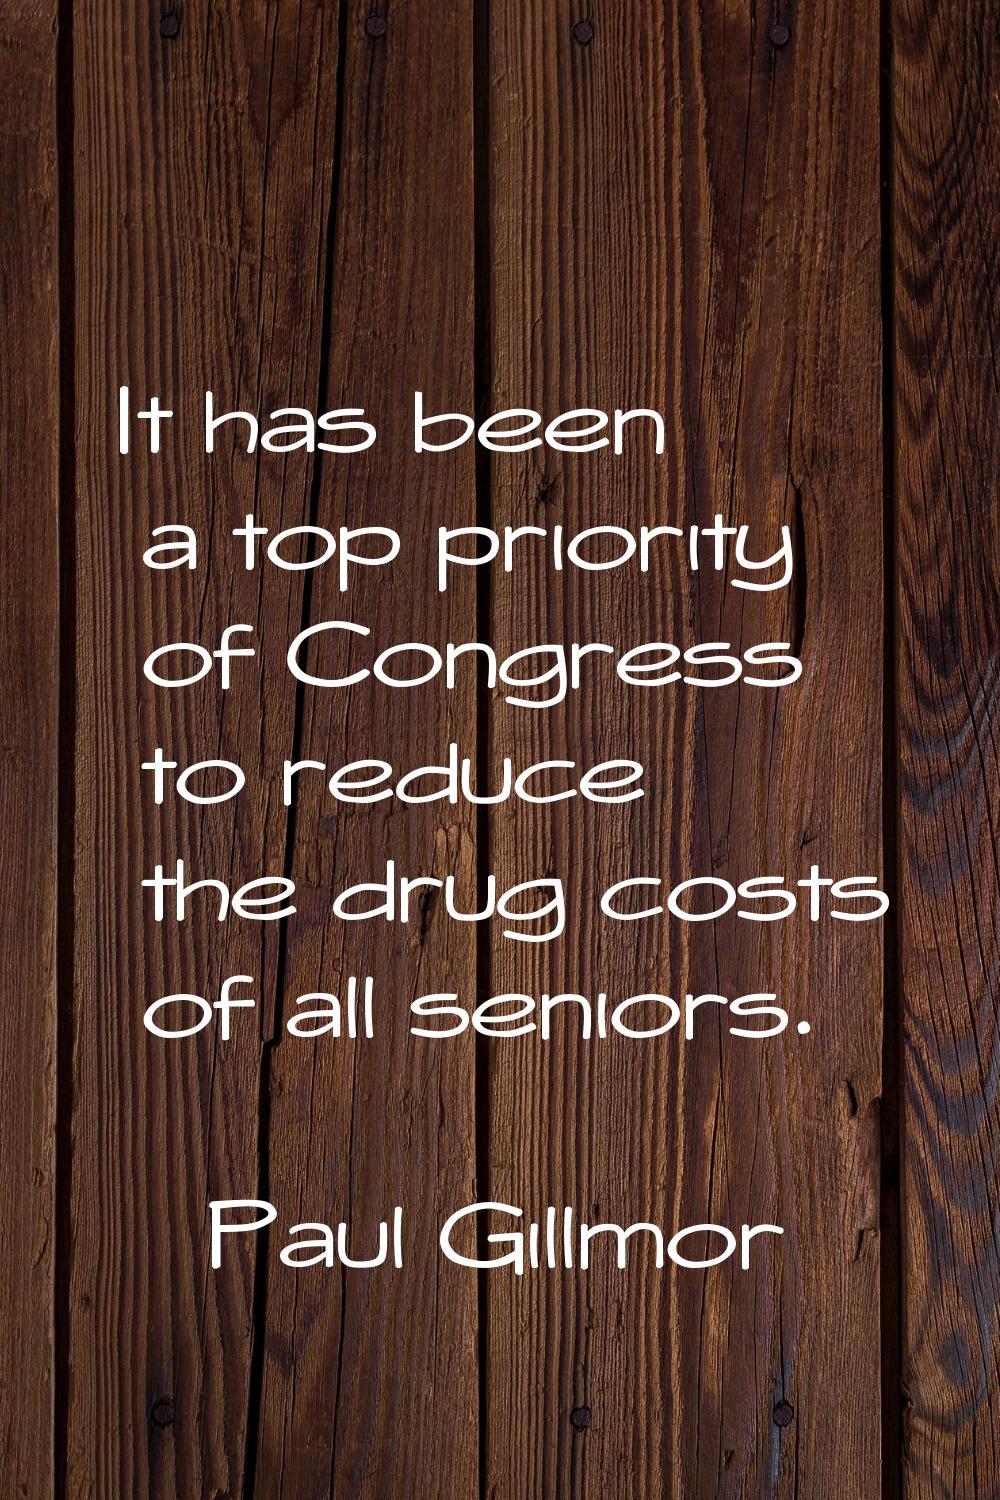 It has been a top priority of Congress to reduce the drug costs of all seniors.